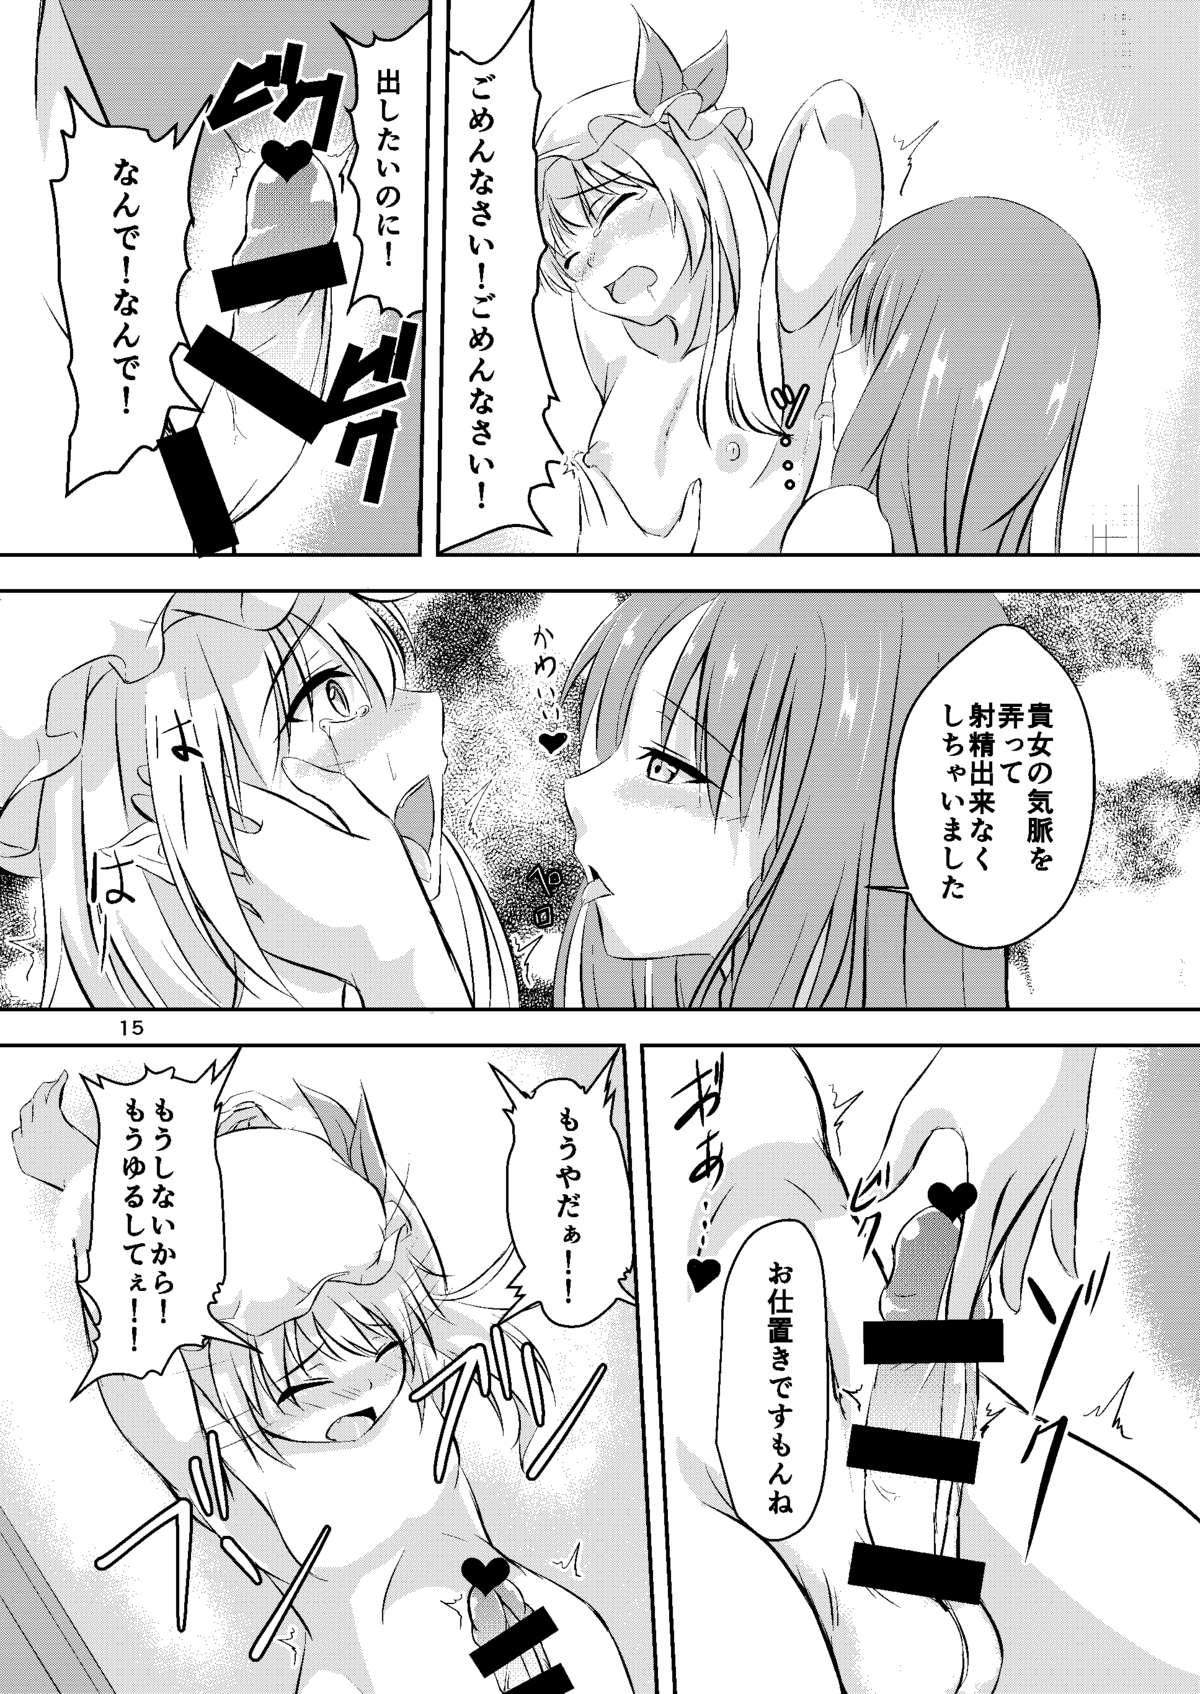 Women Sucking Dick 幻想男娘紅魔館!フランドール - Touhou project Massages - Page 7